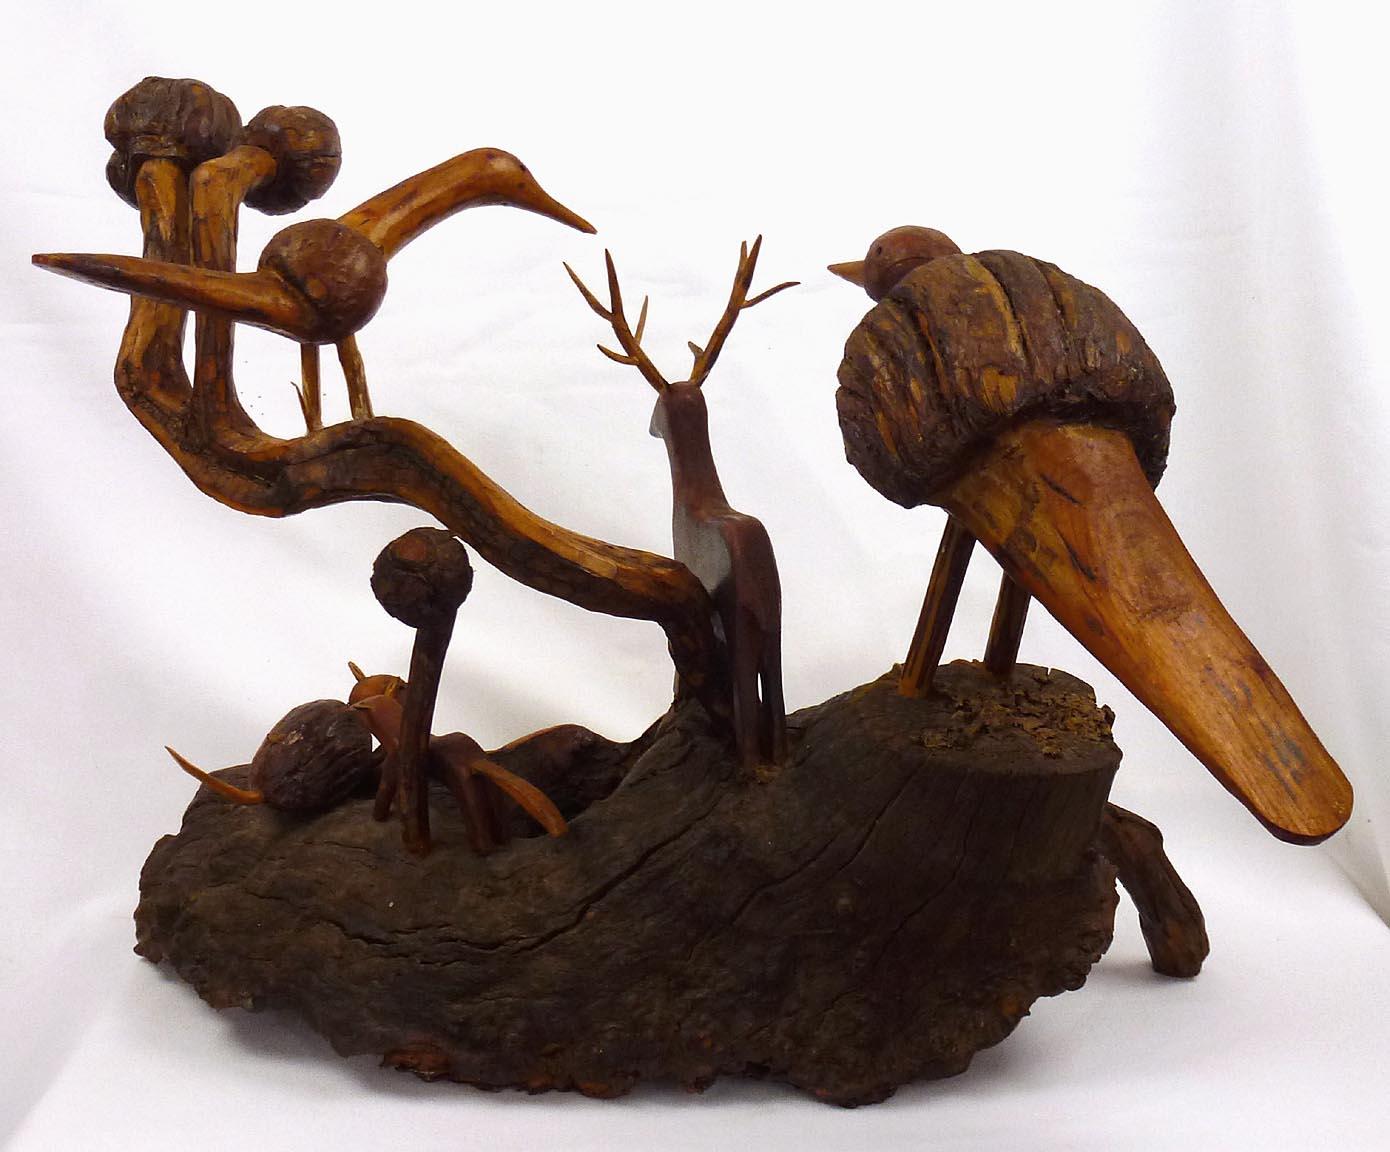 Late 20th Century Assemblage of Carved Birds and Animals by the Outsider Artist Russell Gillespie